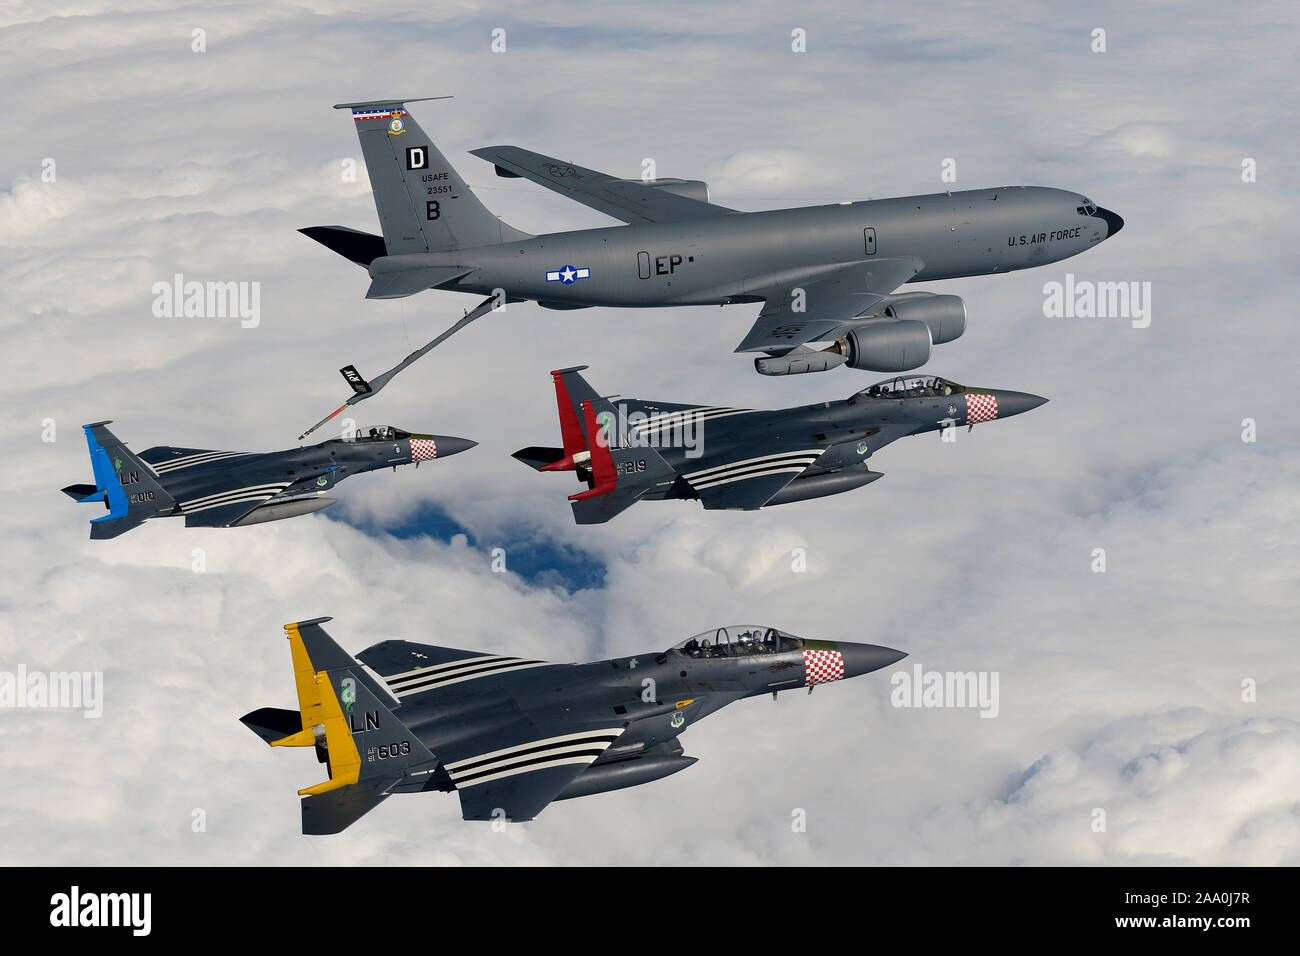 An F-15C Eagle and two F-15E Strike Eagles assigned to the 48th Fighter Wing, RAF Lakenheath, United Kingdom, painted with their respective squadron heritage color scheme, rendezvous with a KC-135 Stratotanker assigned to the 100th Air Refuelling Wing during a flypast over the MSPO Expo at Kielce, Poland, Sept. 3, 2019. The MSPO Expo is an international defense industry exhibition. Stock Photo